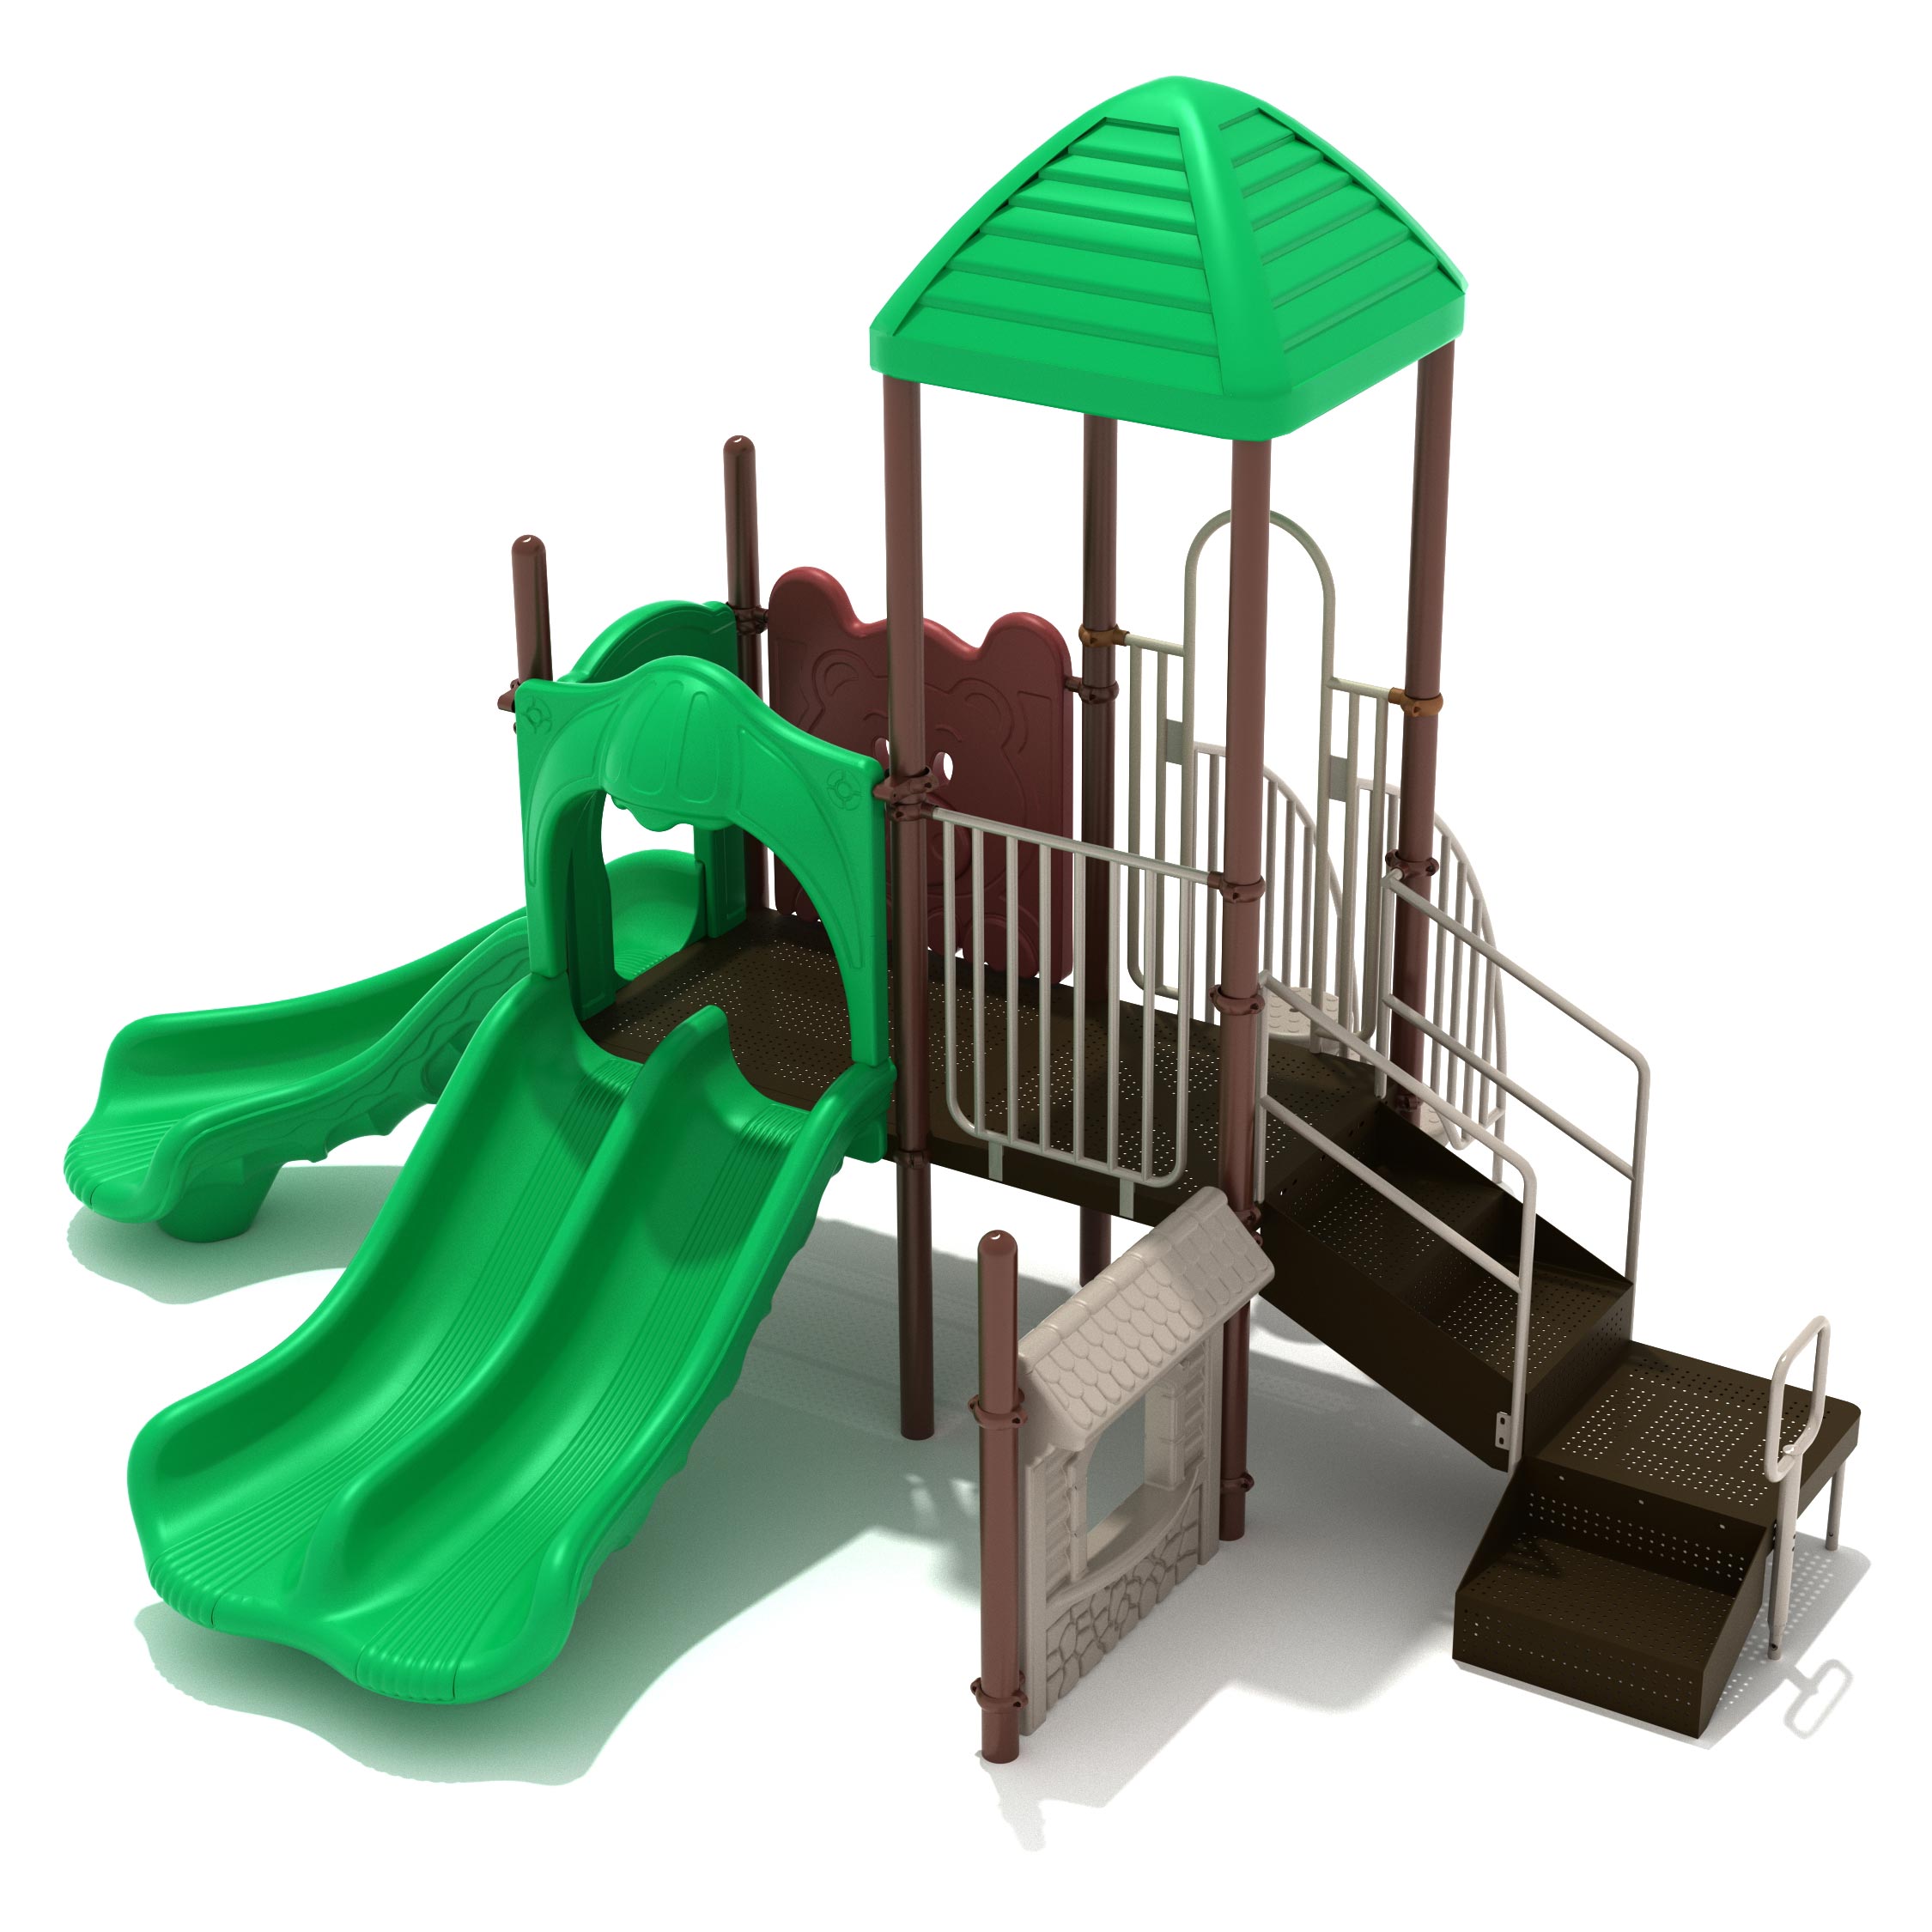 Playground Equipment for children 2 to 5 years old